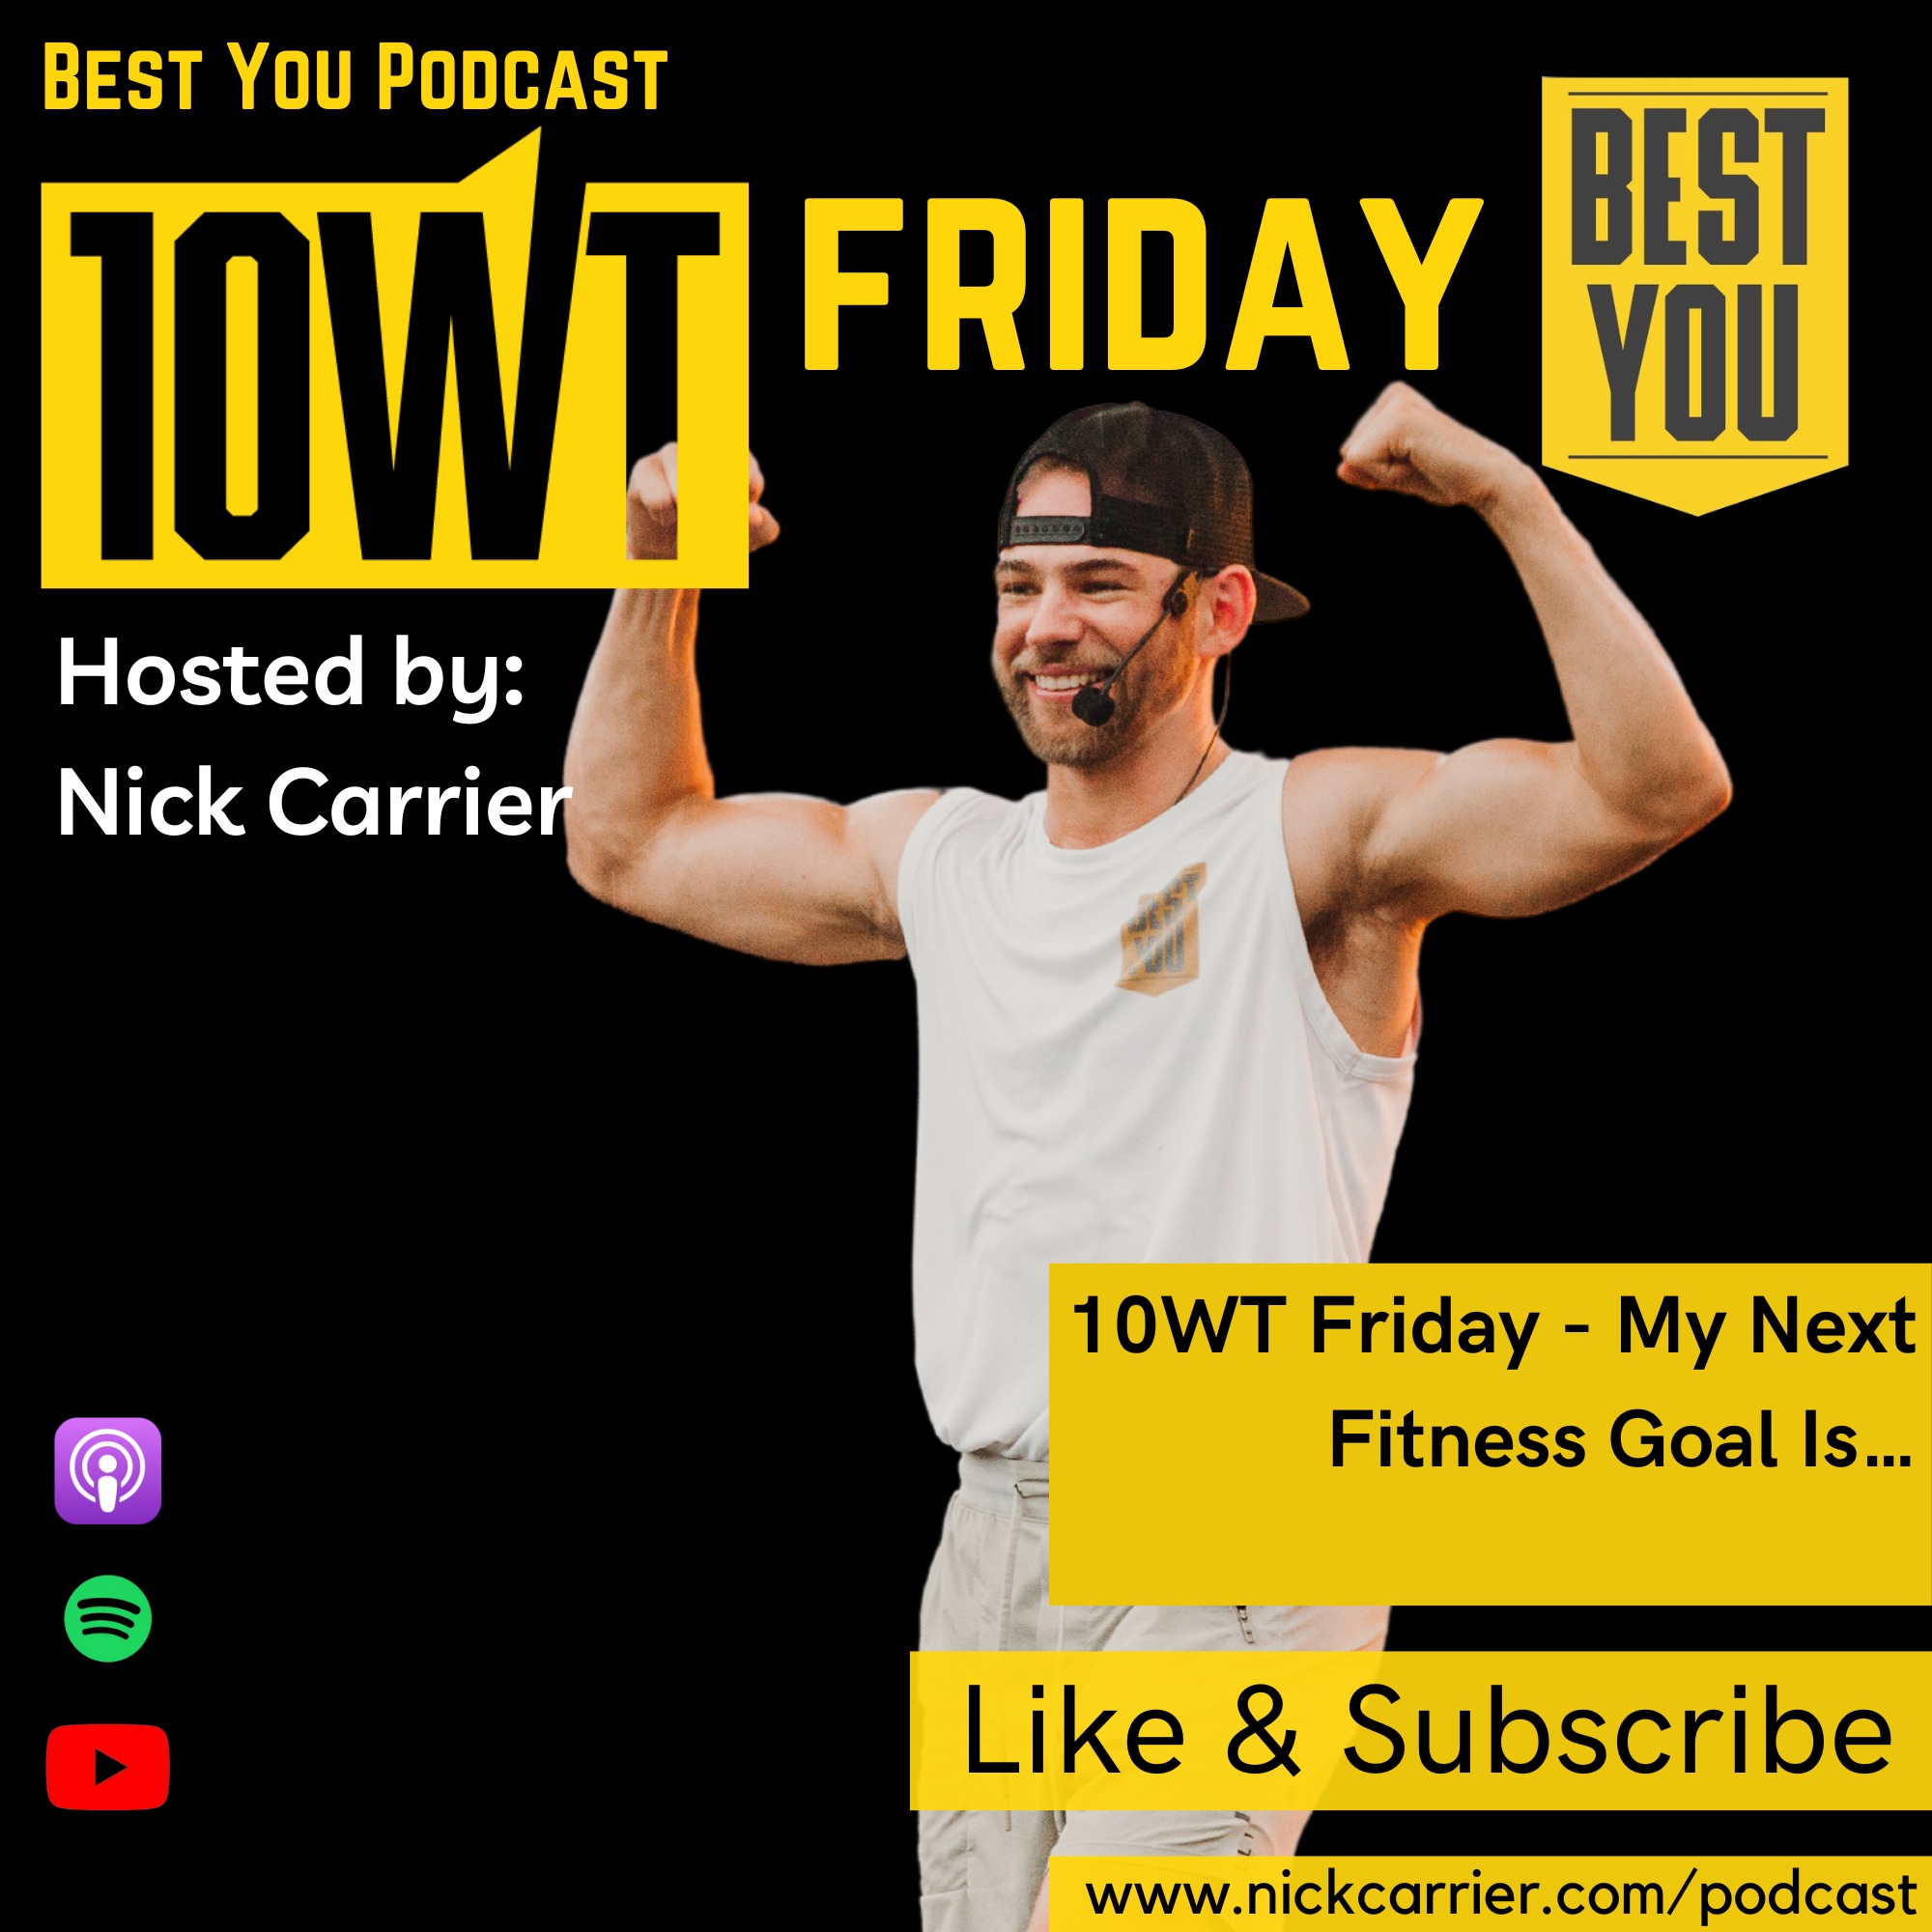 10WT Friday - My Next Fitness Goal Is…